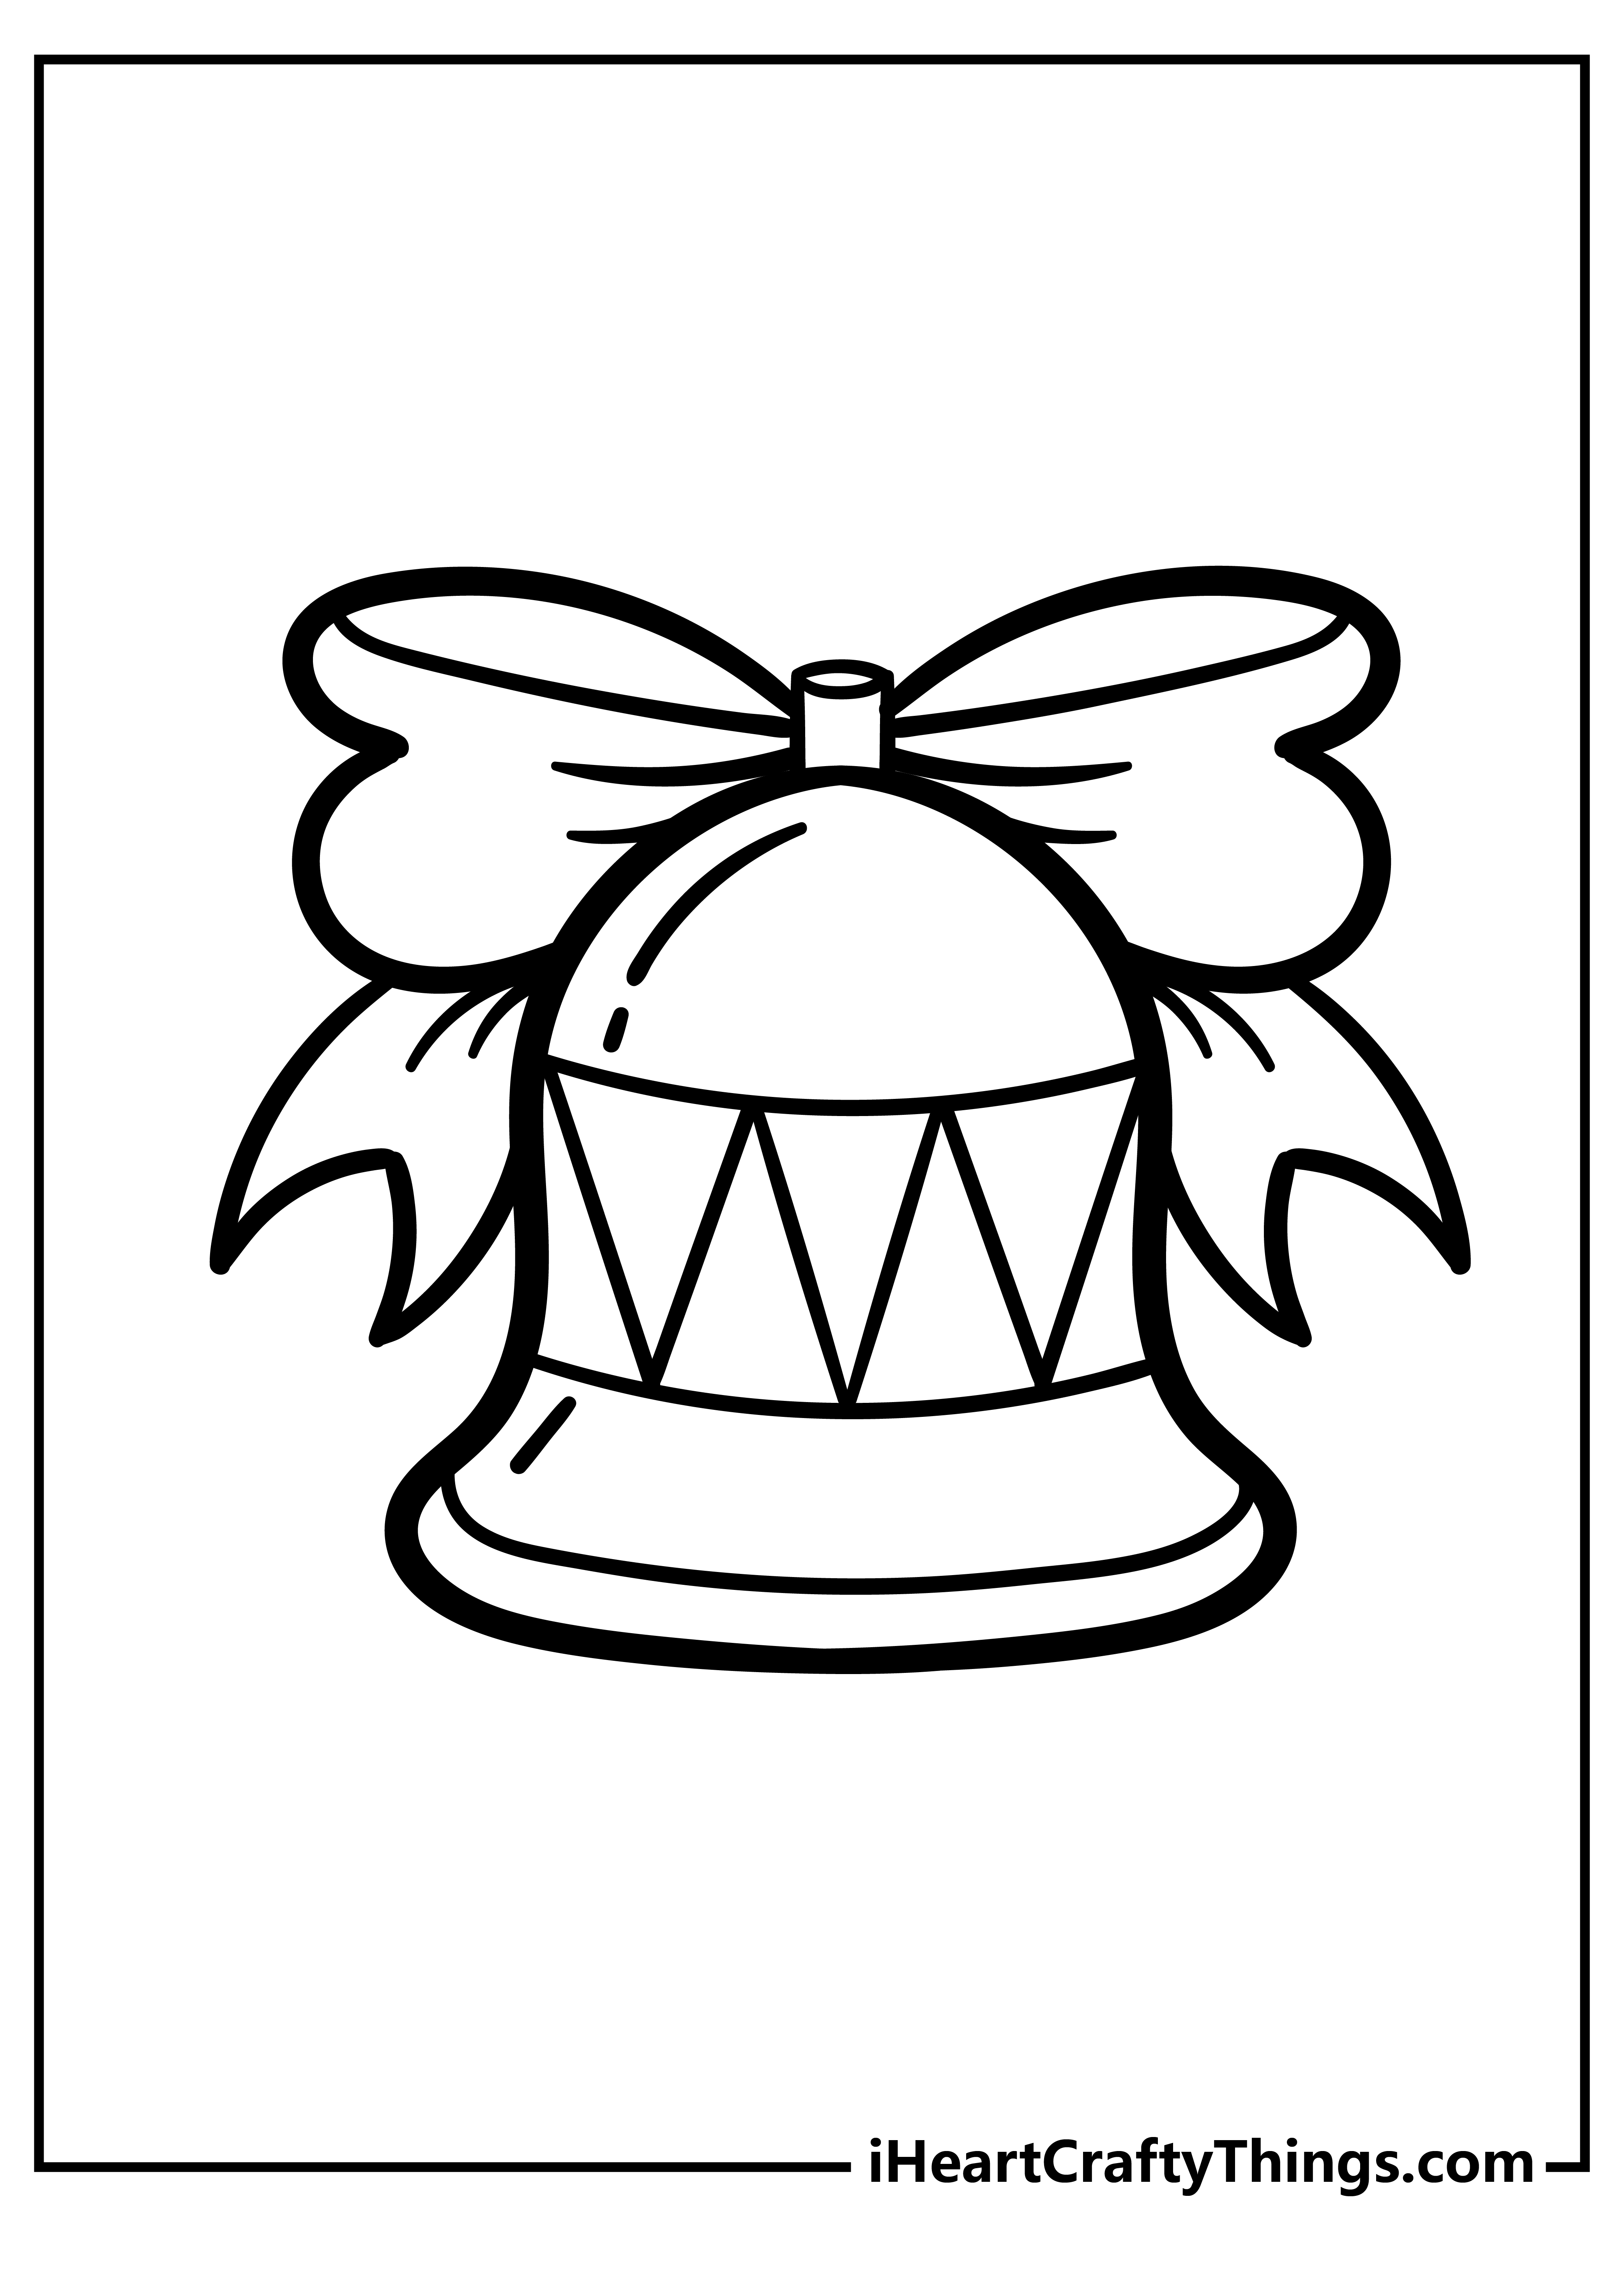 Christmas Ornament Coloring Book for adults free download